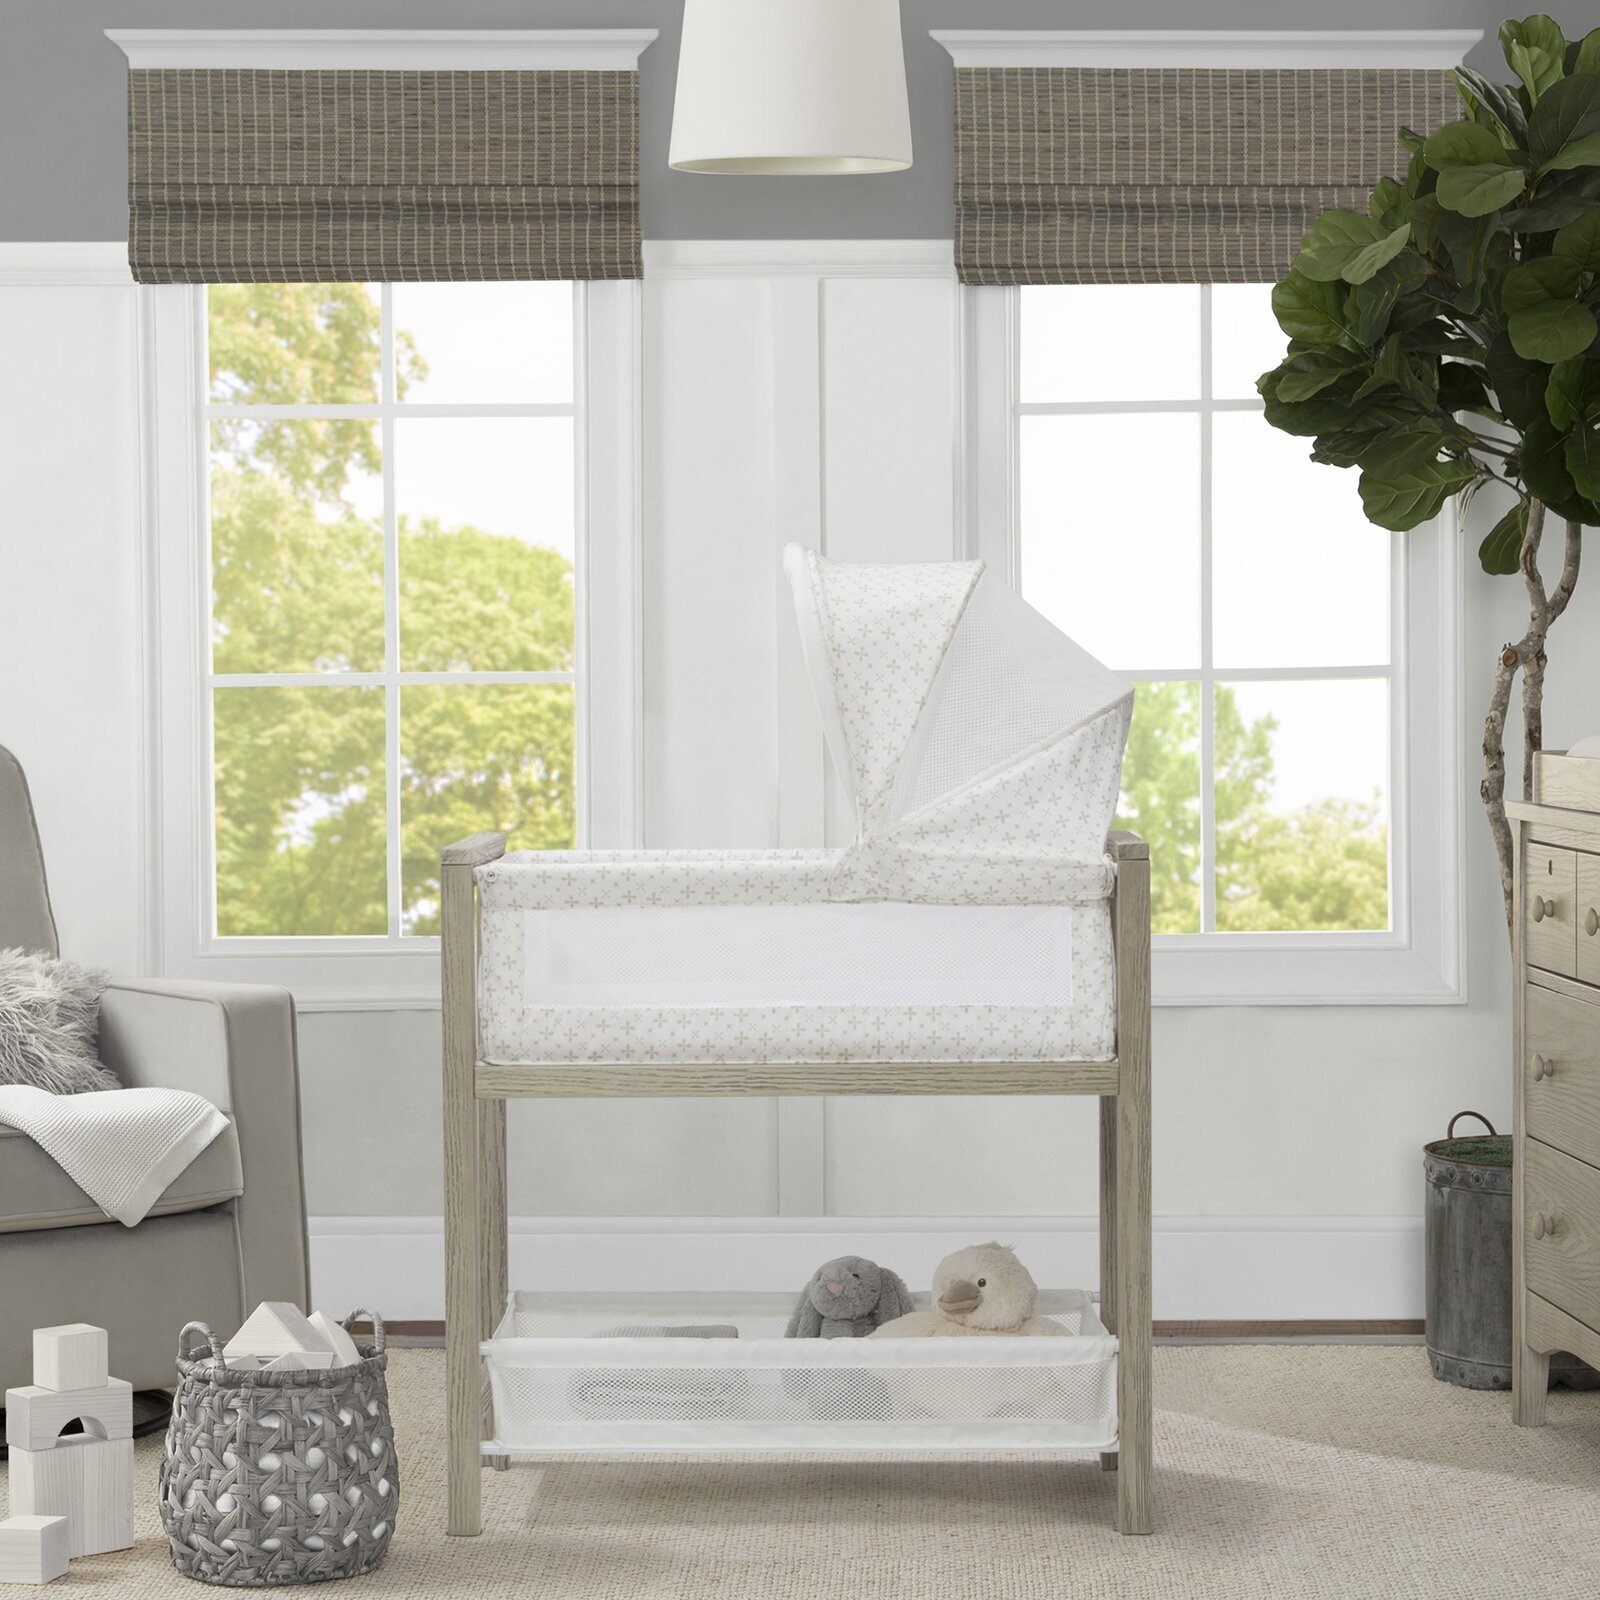 Wooden bassinet with storage